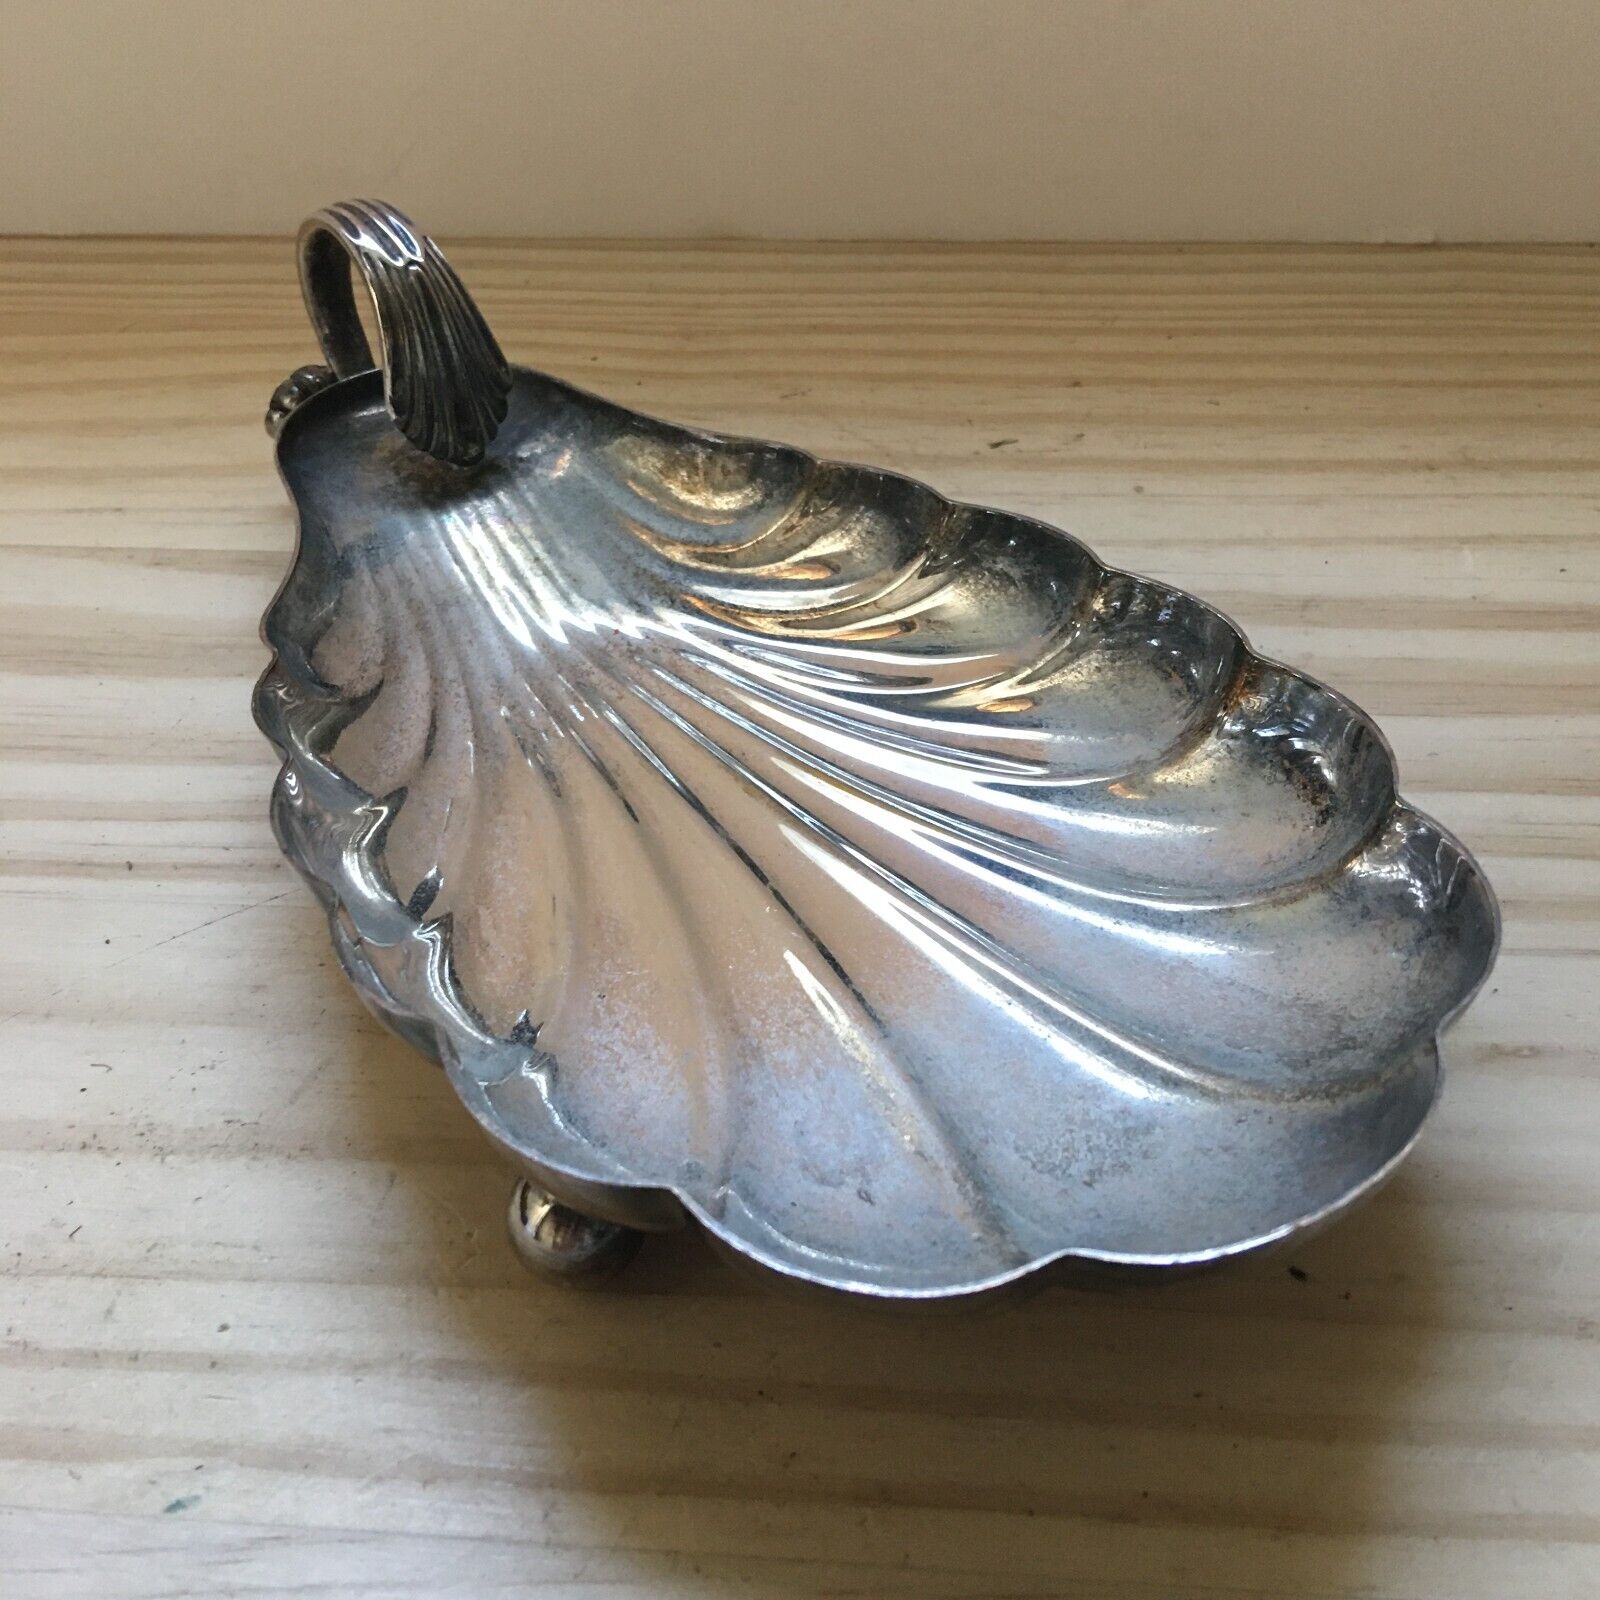 VTG 1970s Silver plated Leaf Shaped Scalloped Nut Candy Dish Serving Tray Footed